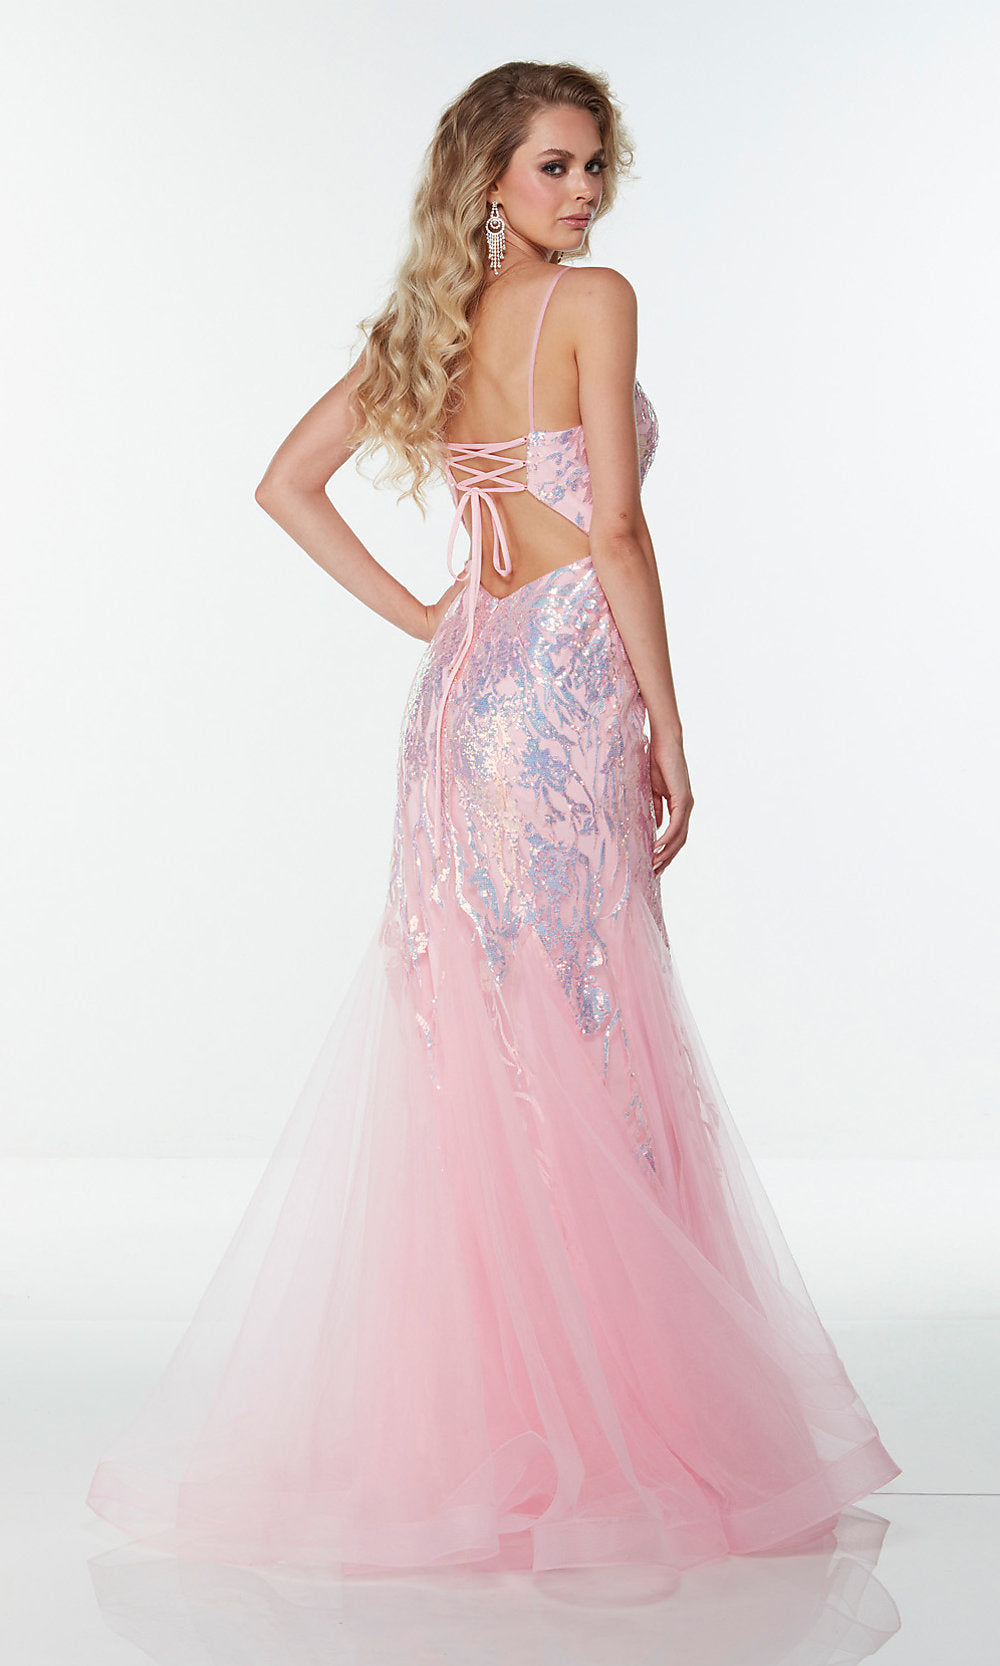  Alyce Long Pink Prom Dress with Iridescent Sequins